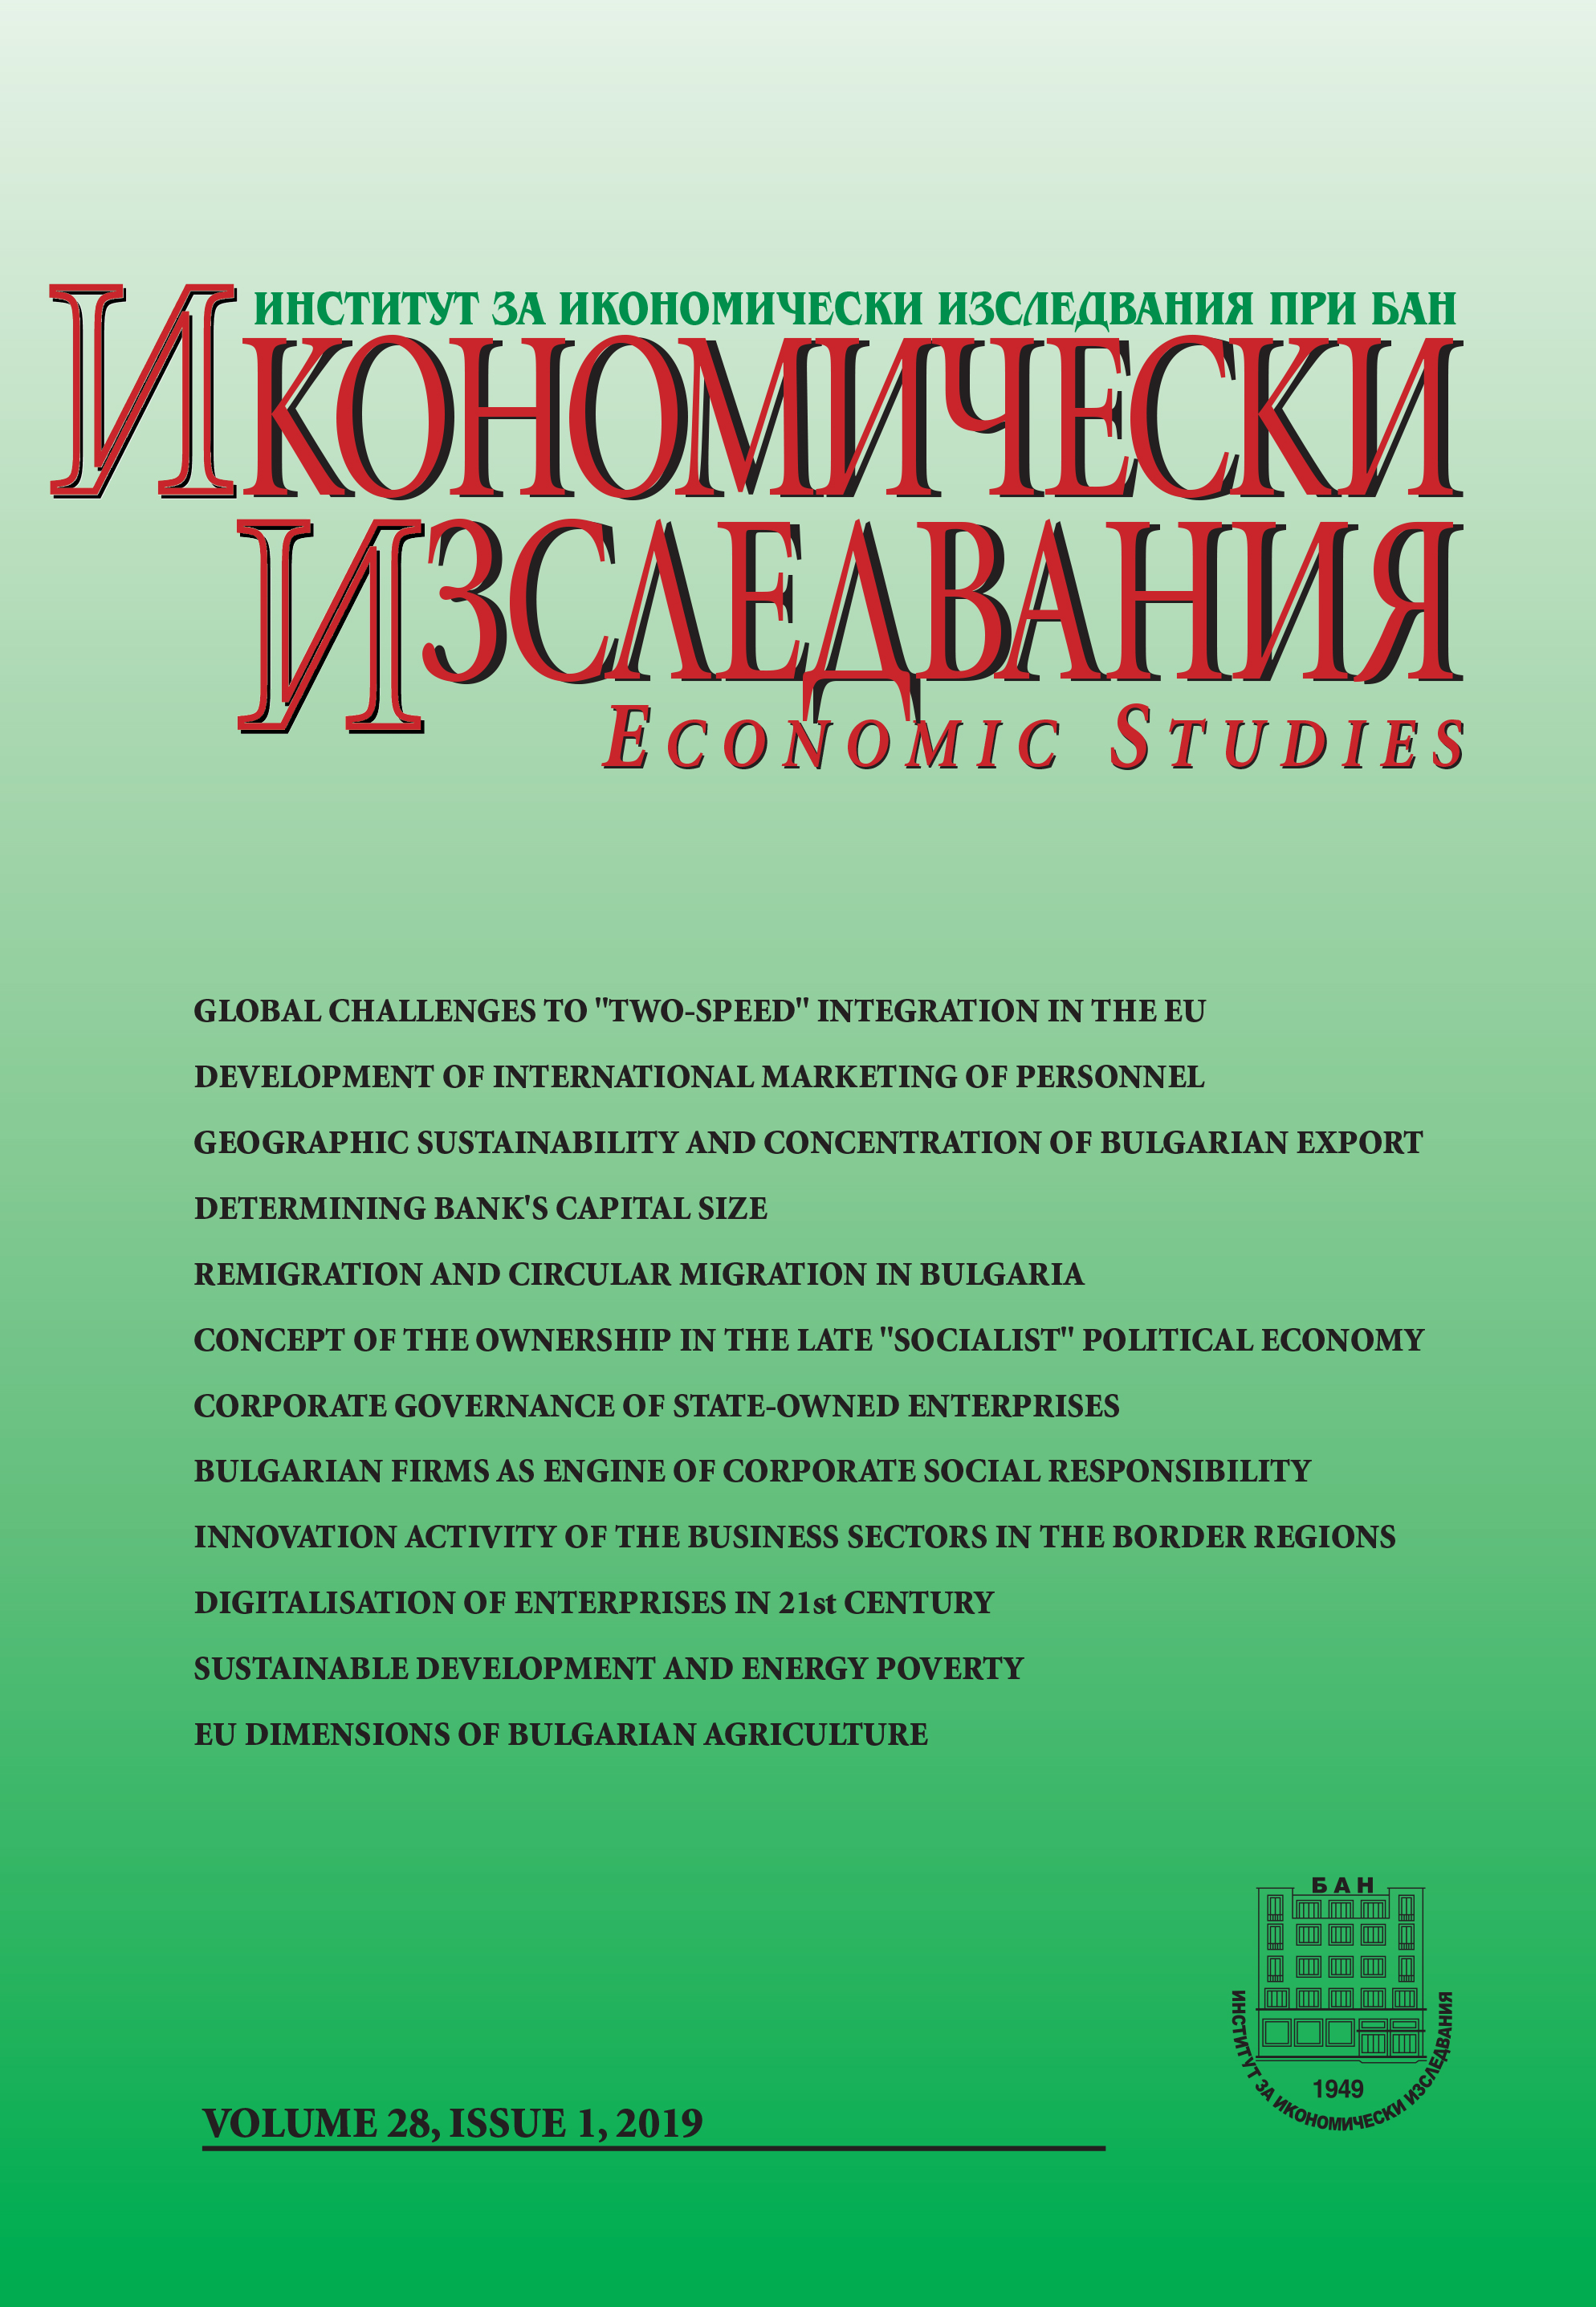 The Concept of the Ownership in the Late 'Socialist' Political Economy Cover Image